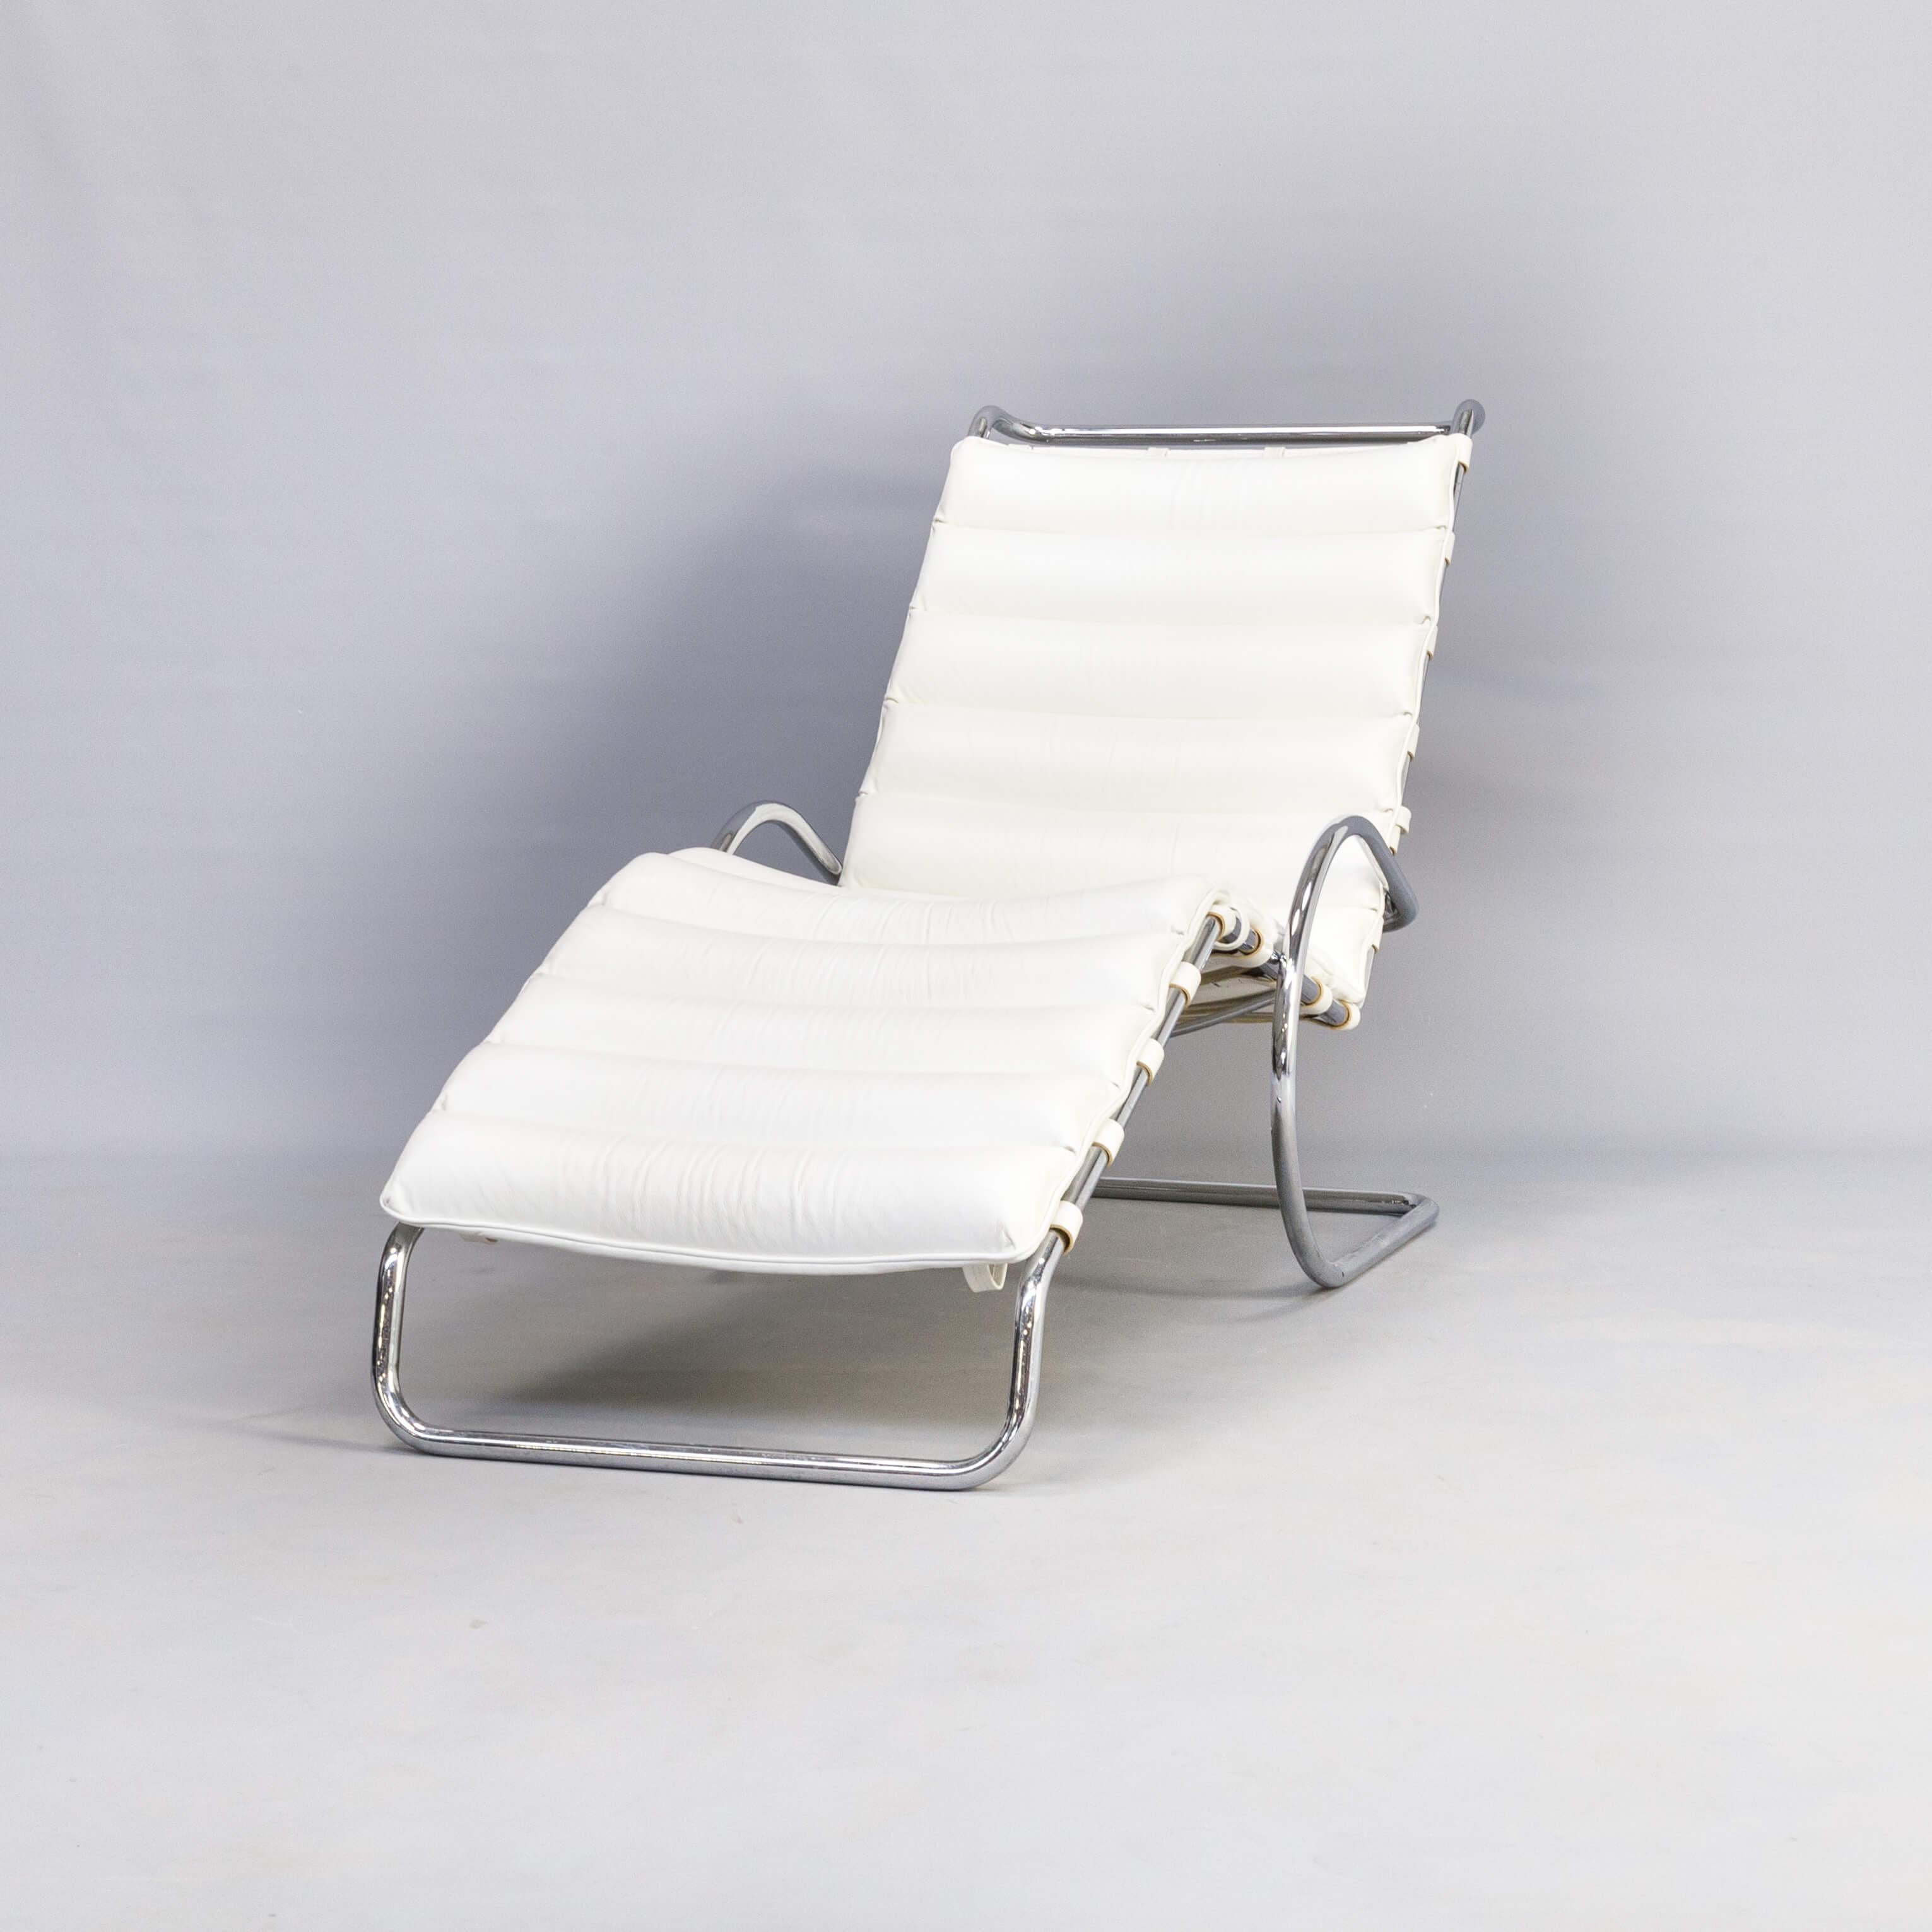 1965, Ludwig Mies van der Rohe, rare early production ‘MR Chaise’ for Knoll. The MR chaise has been designed already in the very early years of Mies, started to be manufactured by Knoll and still today it is possible to buy new editions. This piece